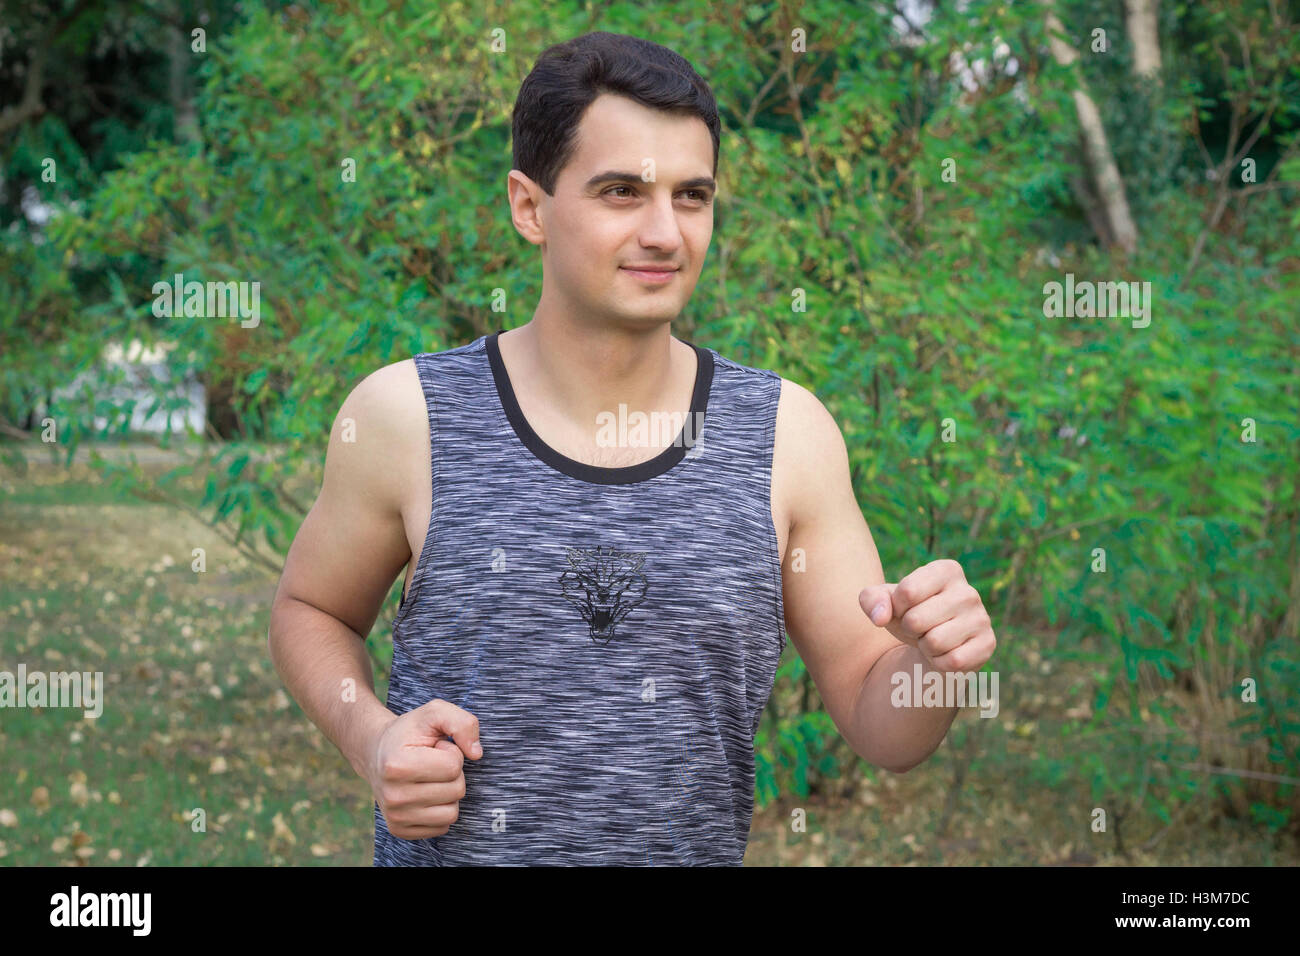 Young fitness man runs during his training workout in park outdoor Stock Photo